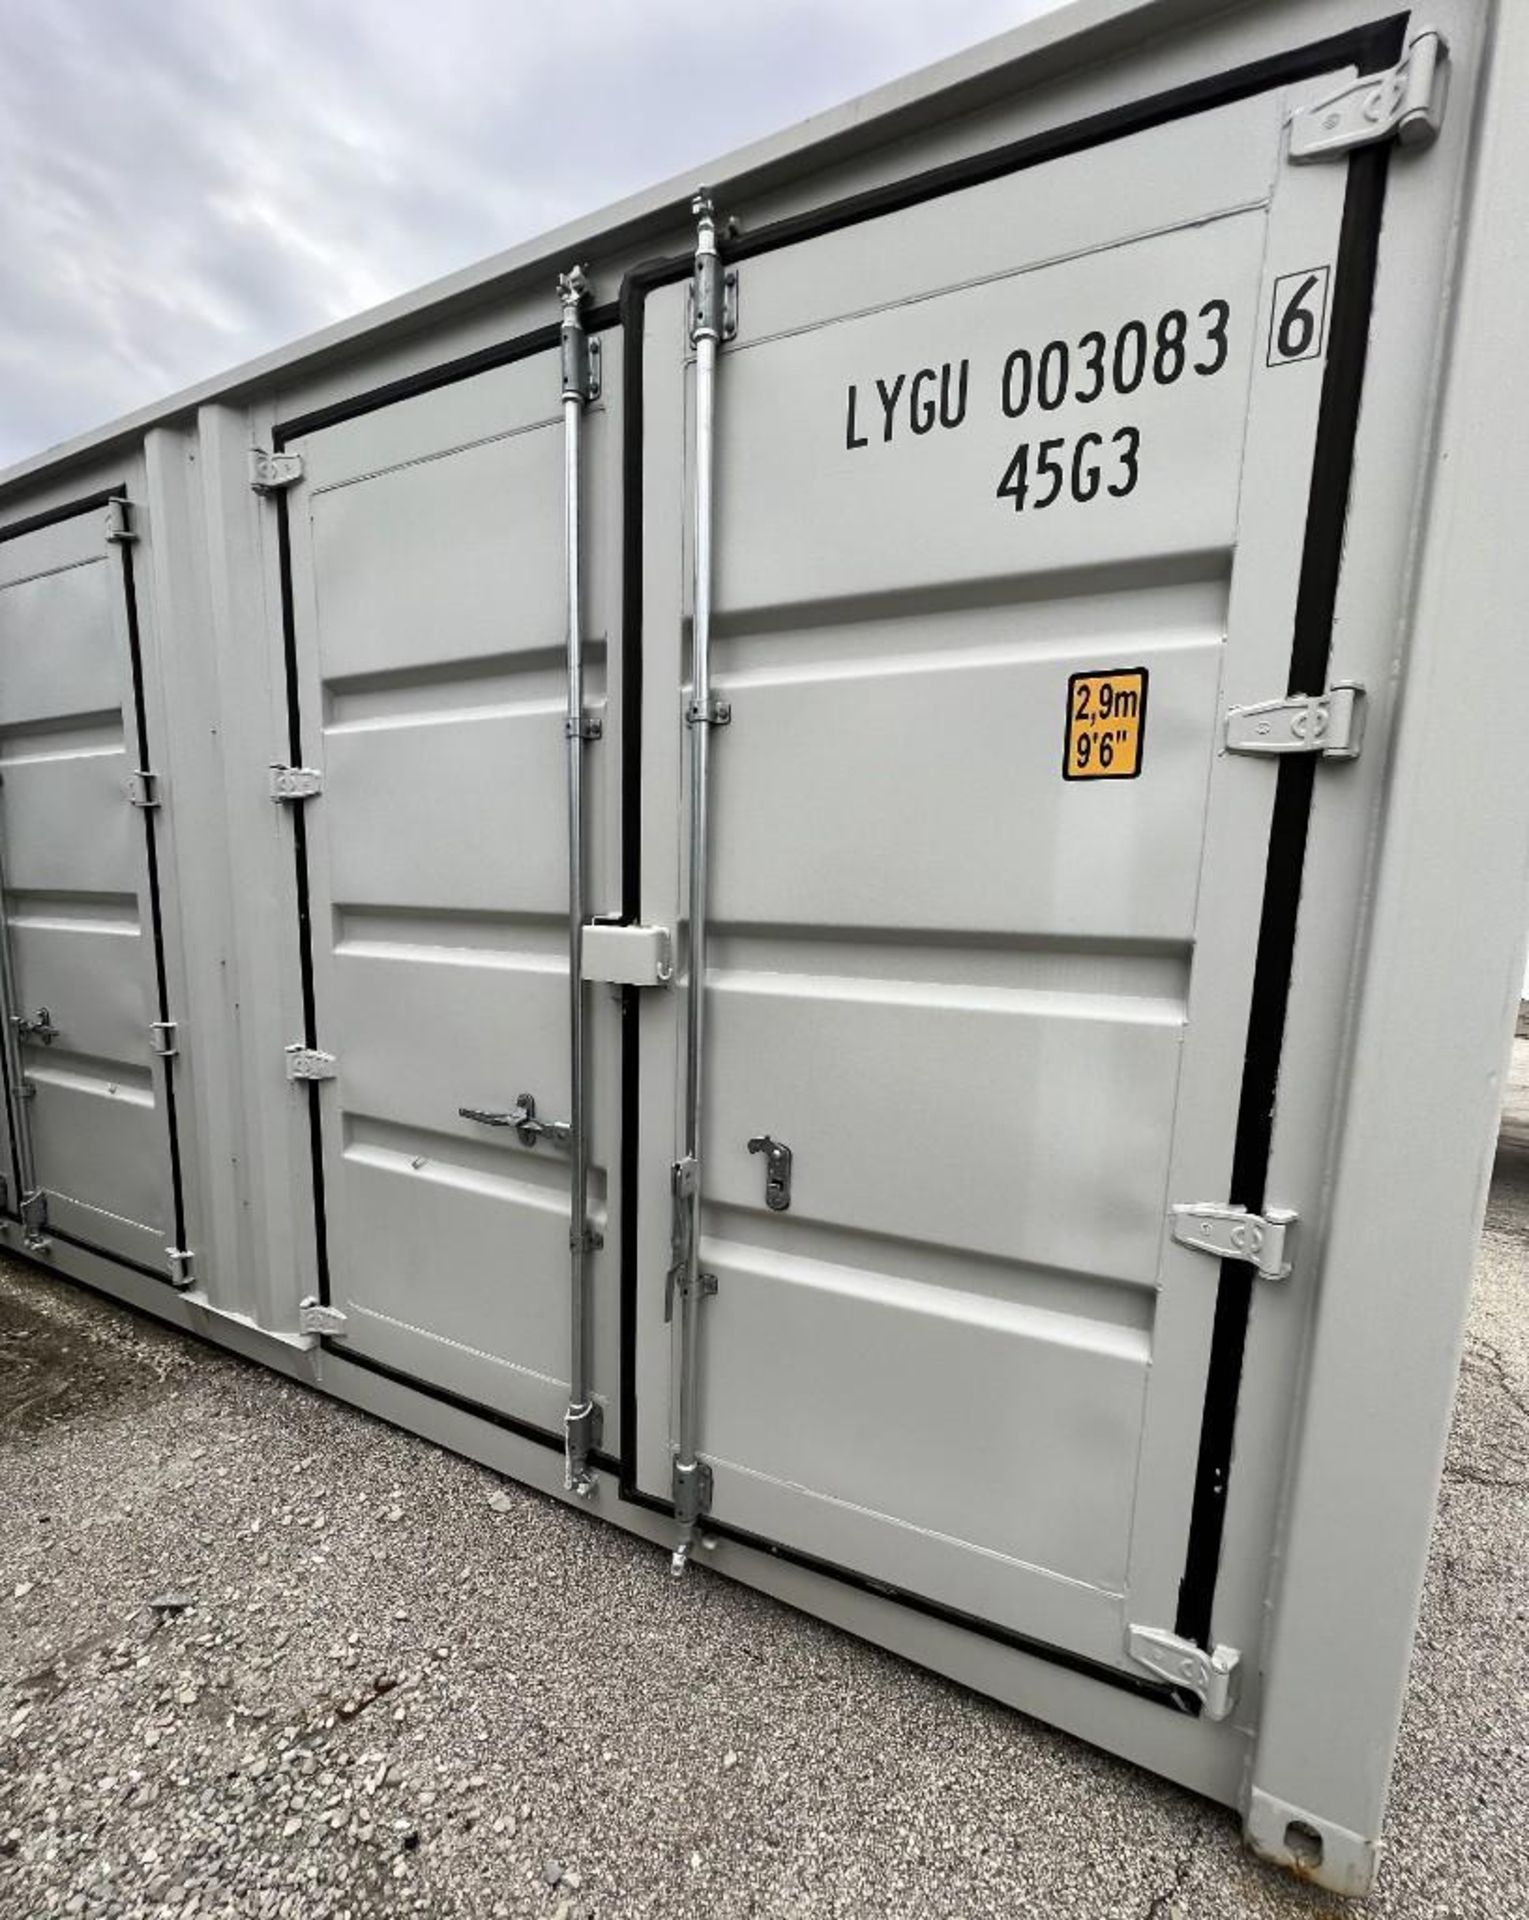 Suihe Type M45G3QC 40' High Cube Open-Sided Storage Container. Serial# DFOC003543, Built 06/2021. - Image 6 of 11